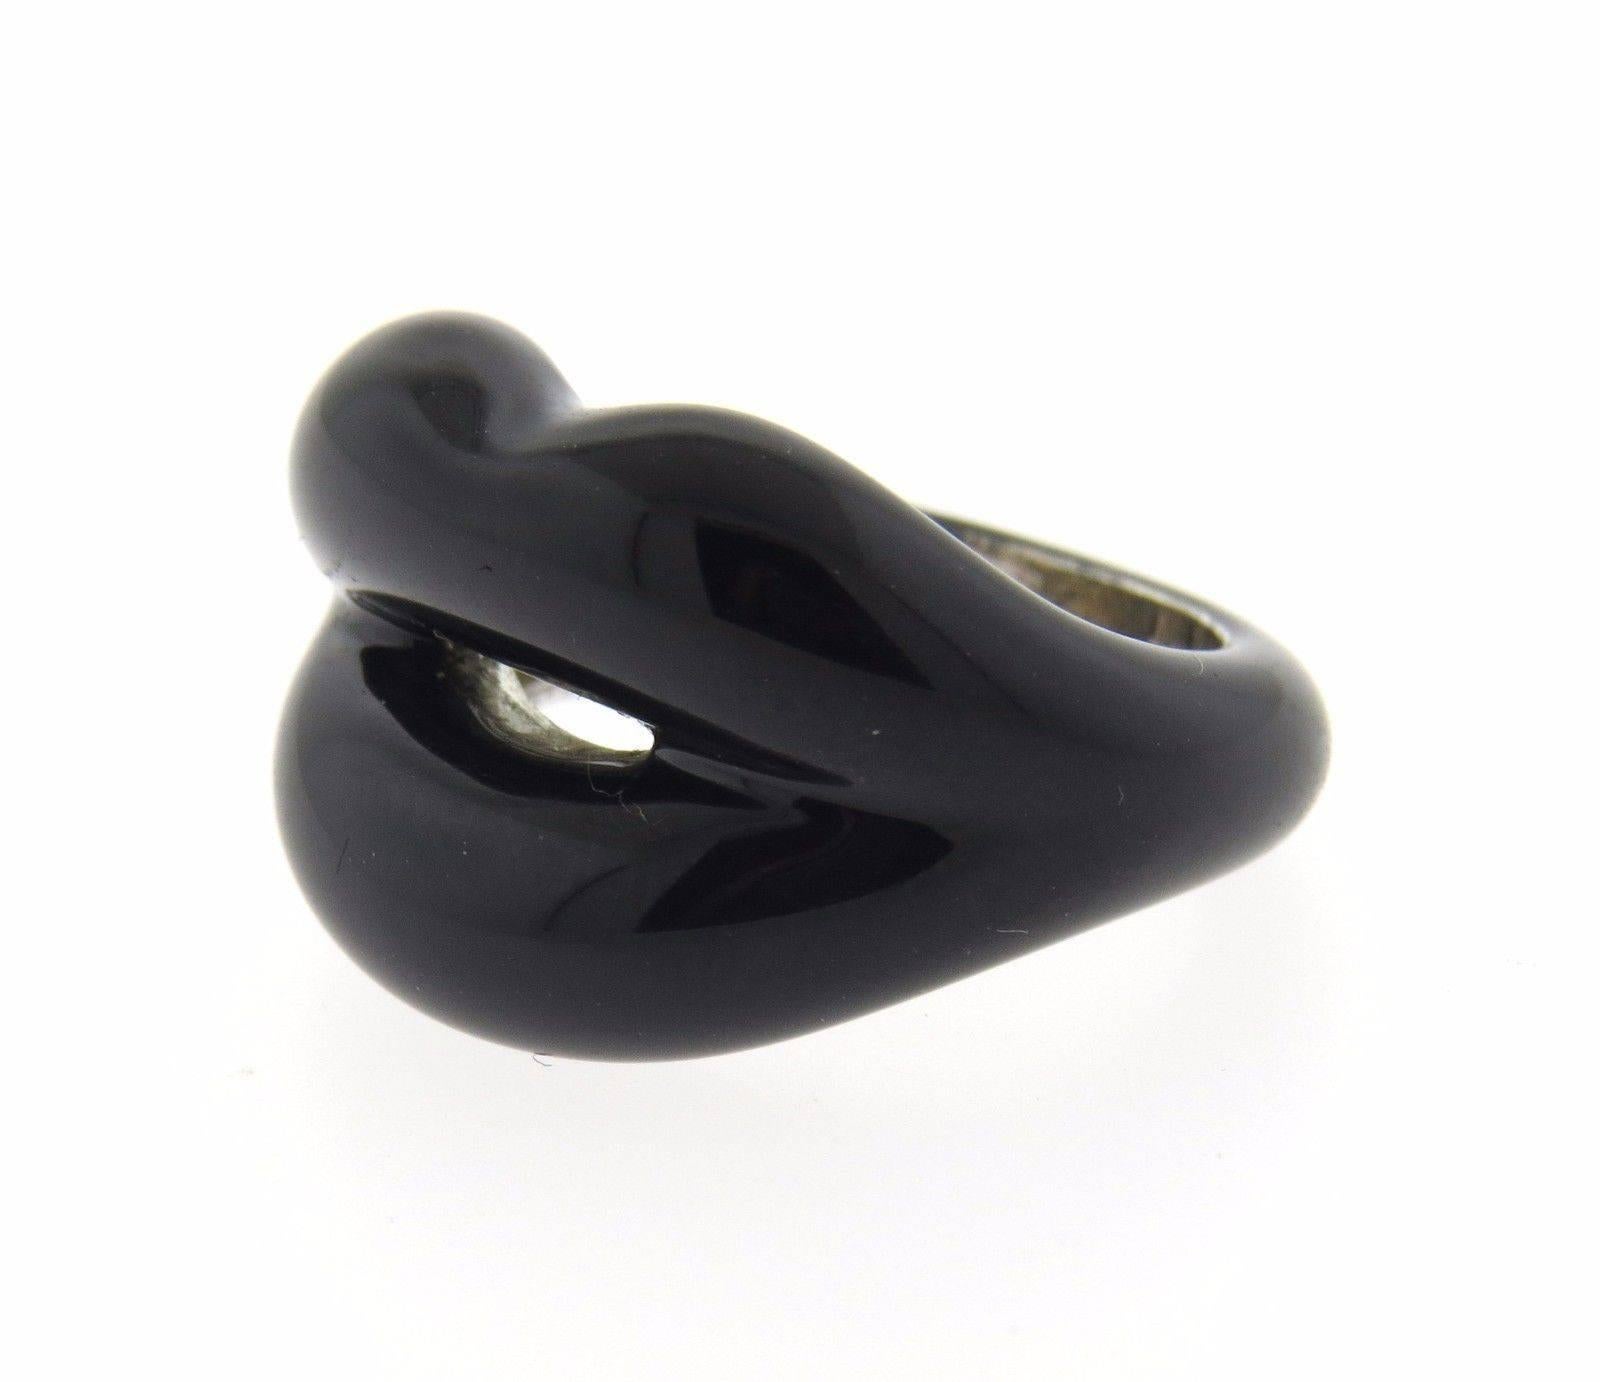 A sterling silver ring adorned with black enamel.  The ring is a size 3.75, top measures 16mm at widest point.  The ring has a weight of 12 grams.  Marked: S-AP 925.